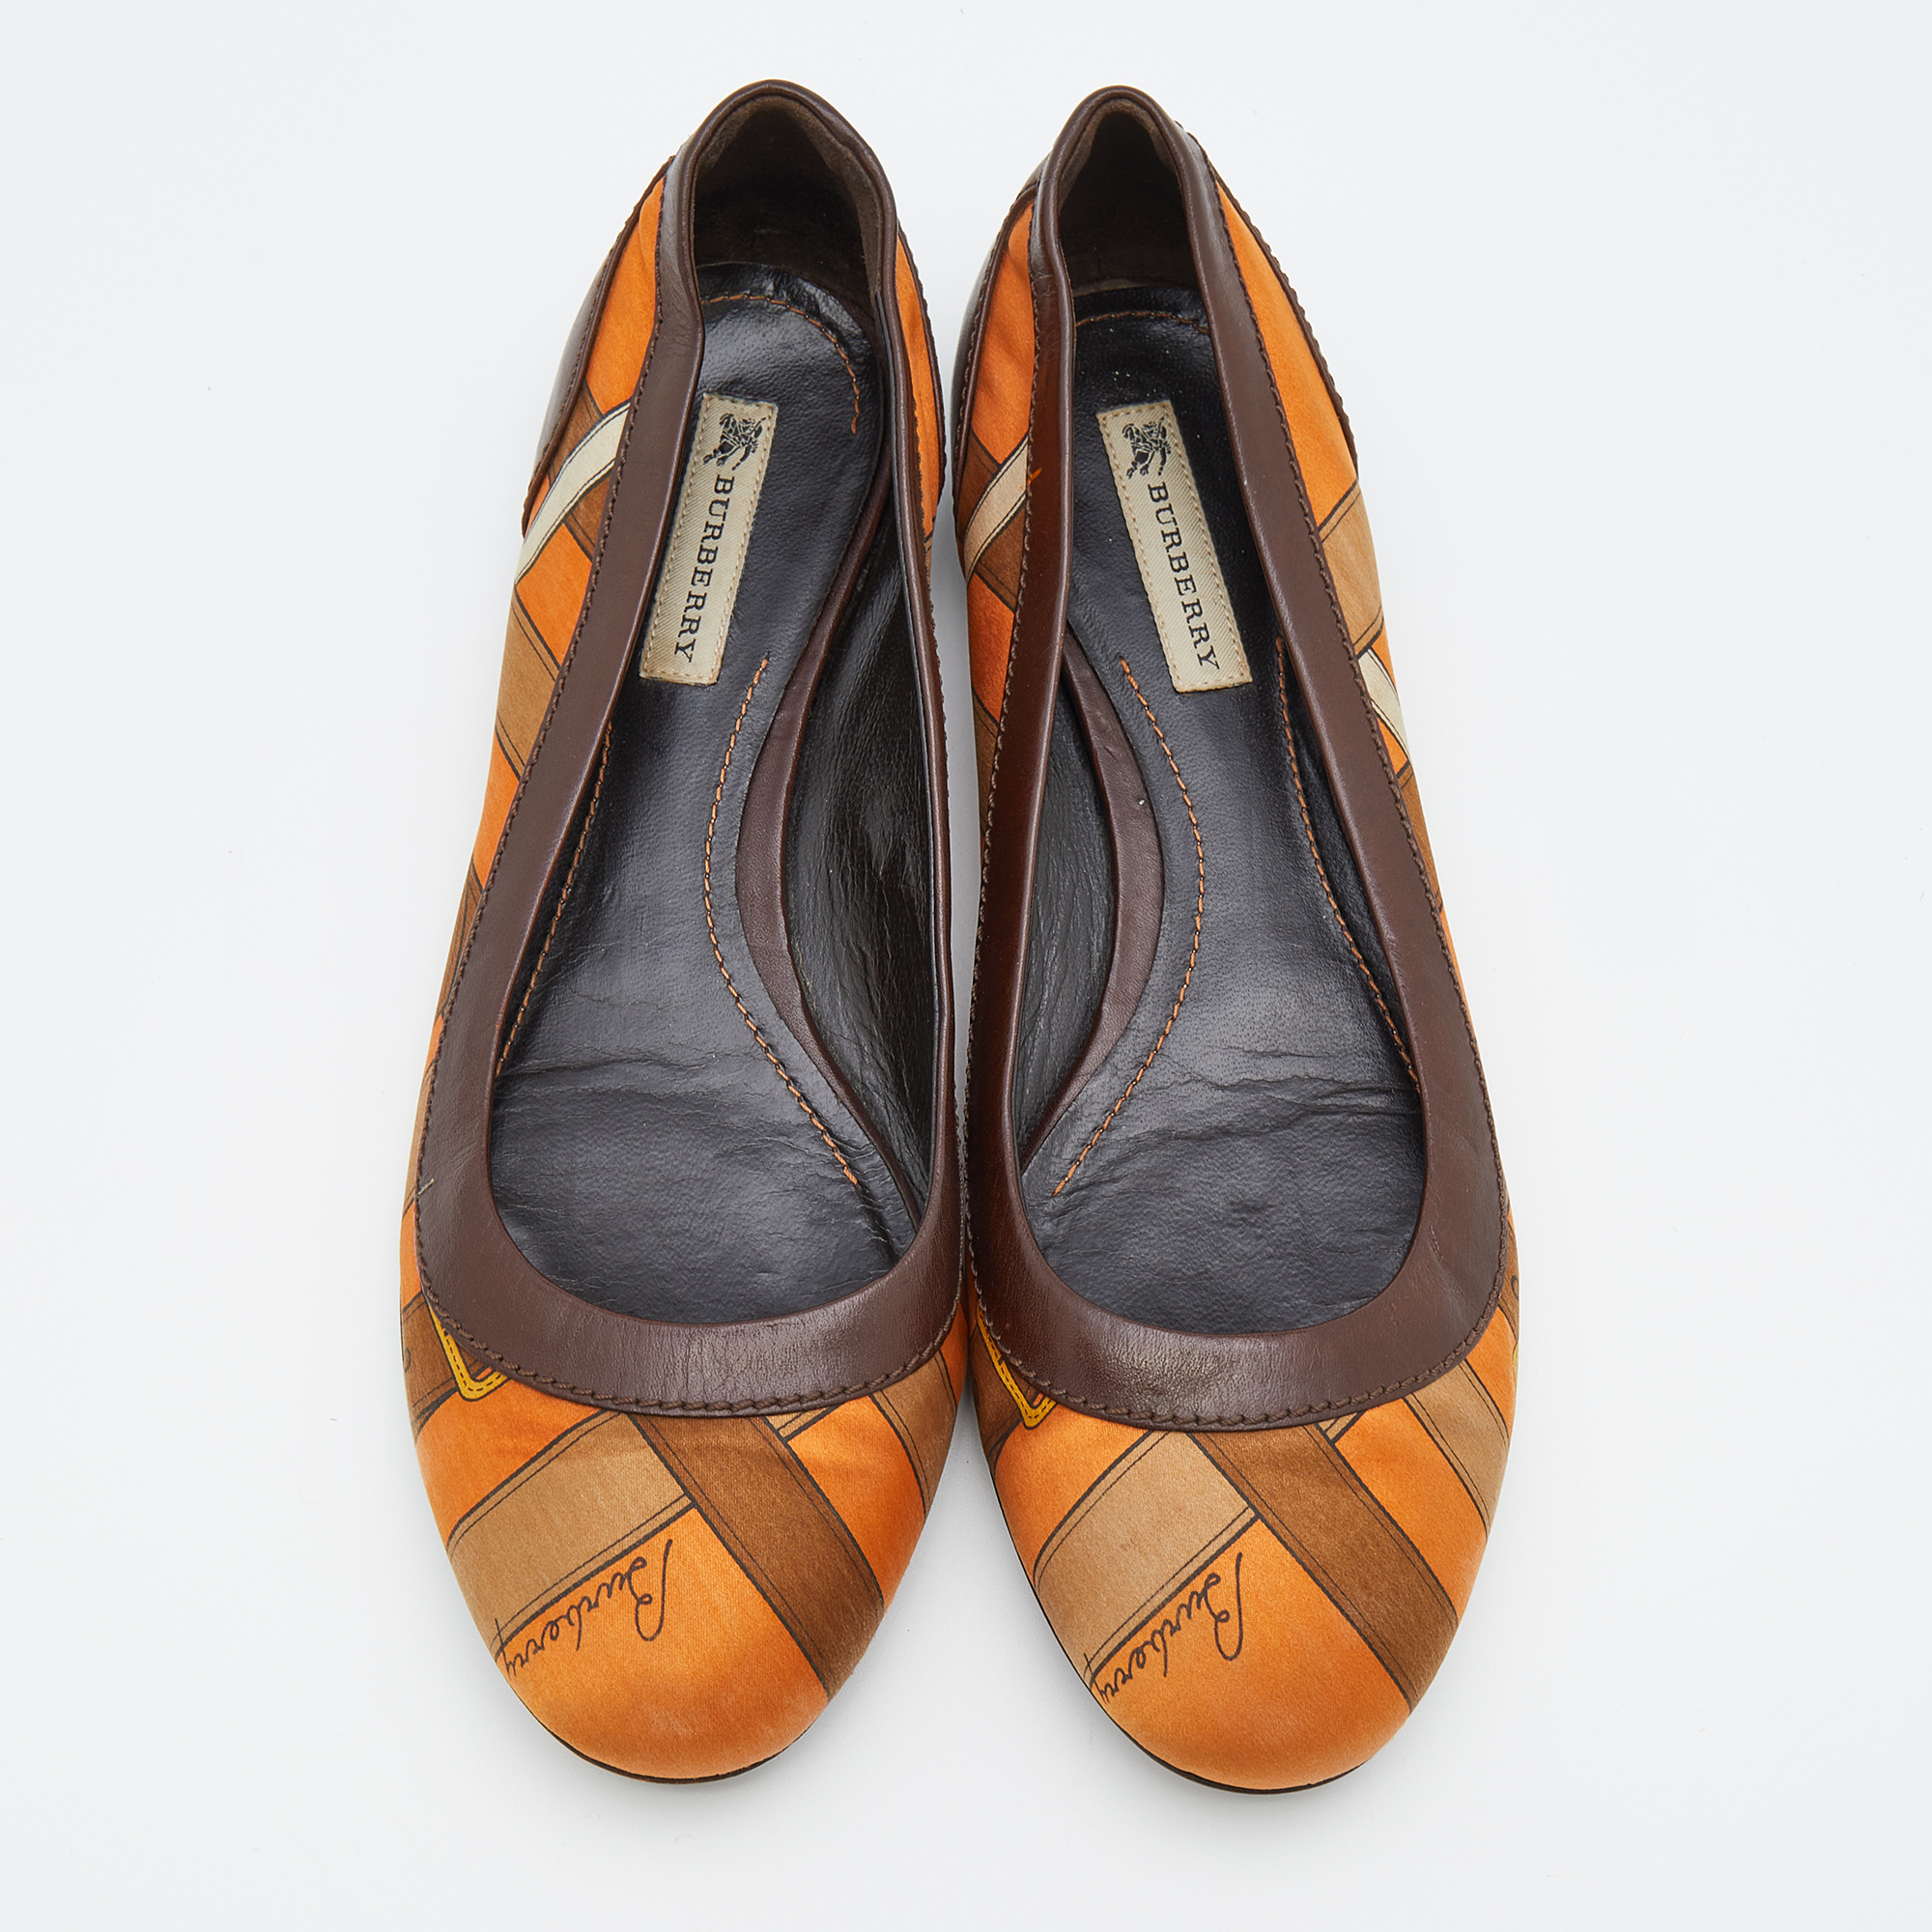 Burberry Brown/Orange Leather And Satin Ballet Flats Size 36